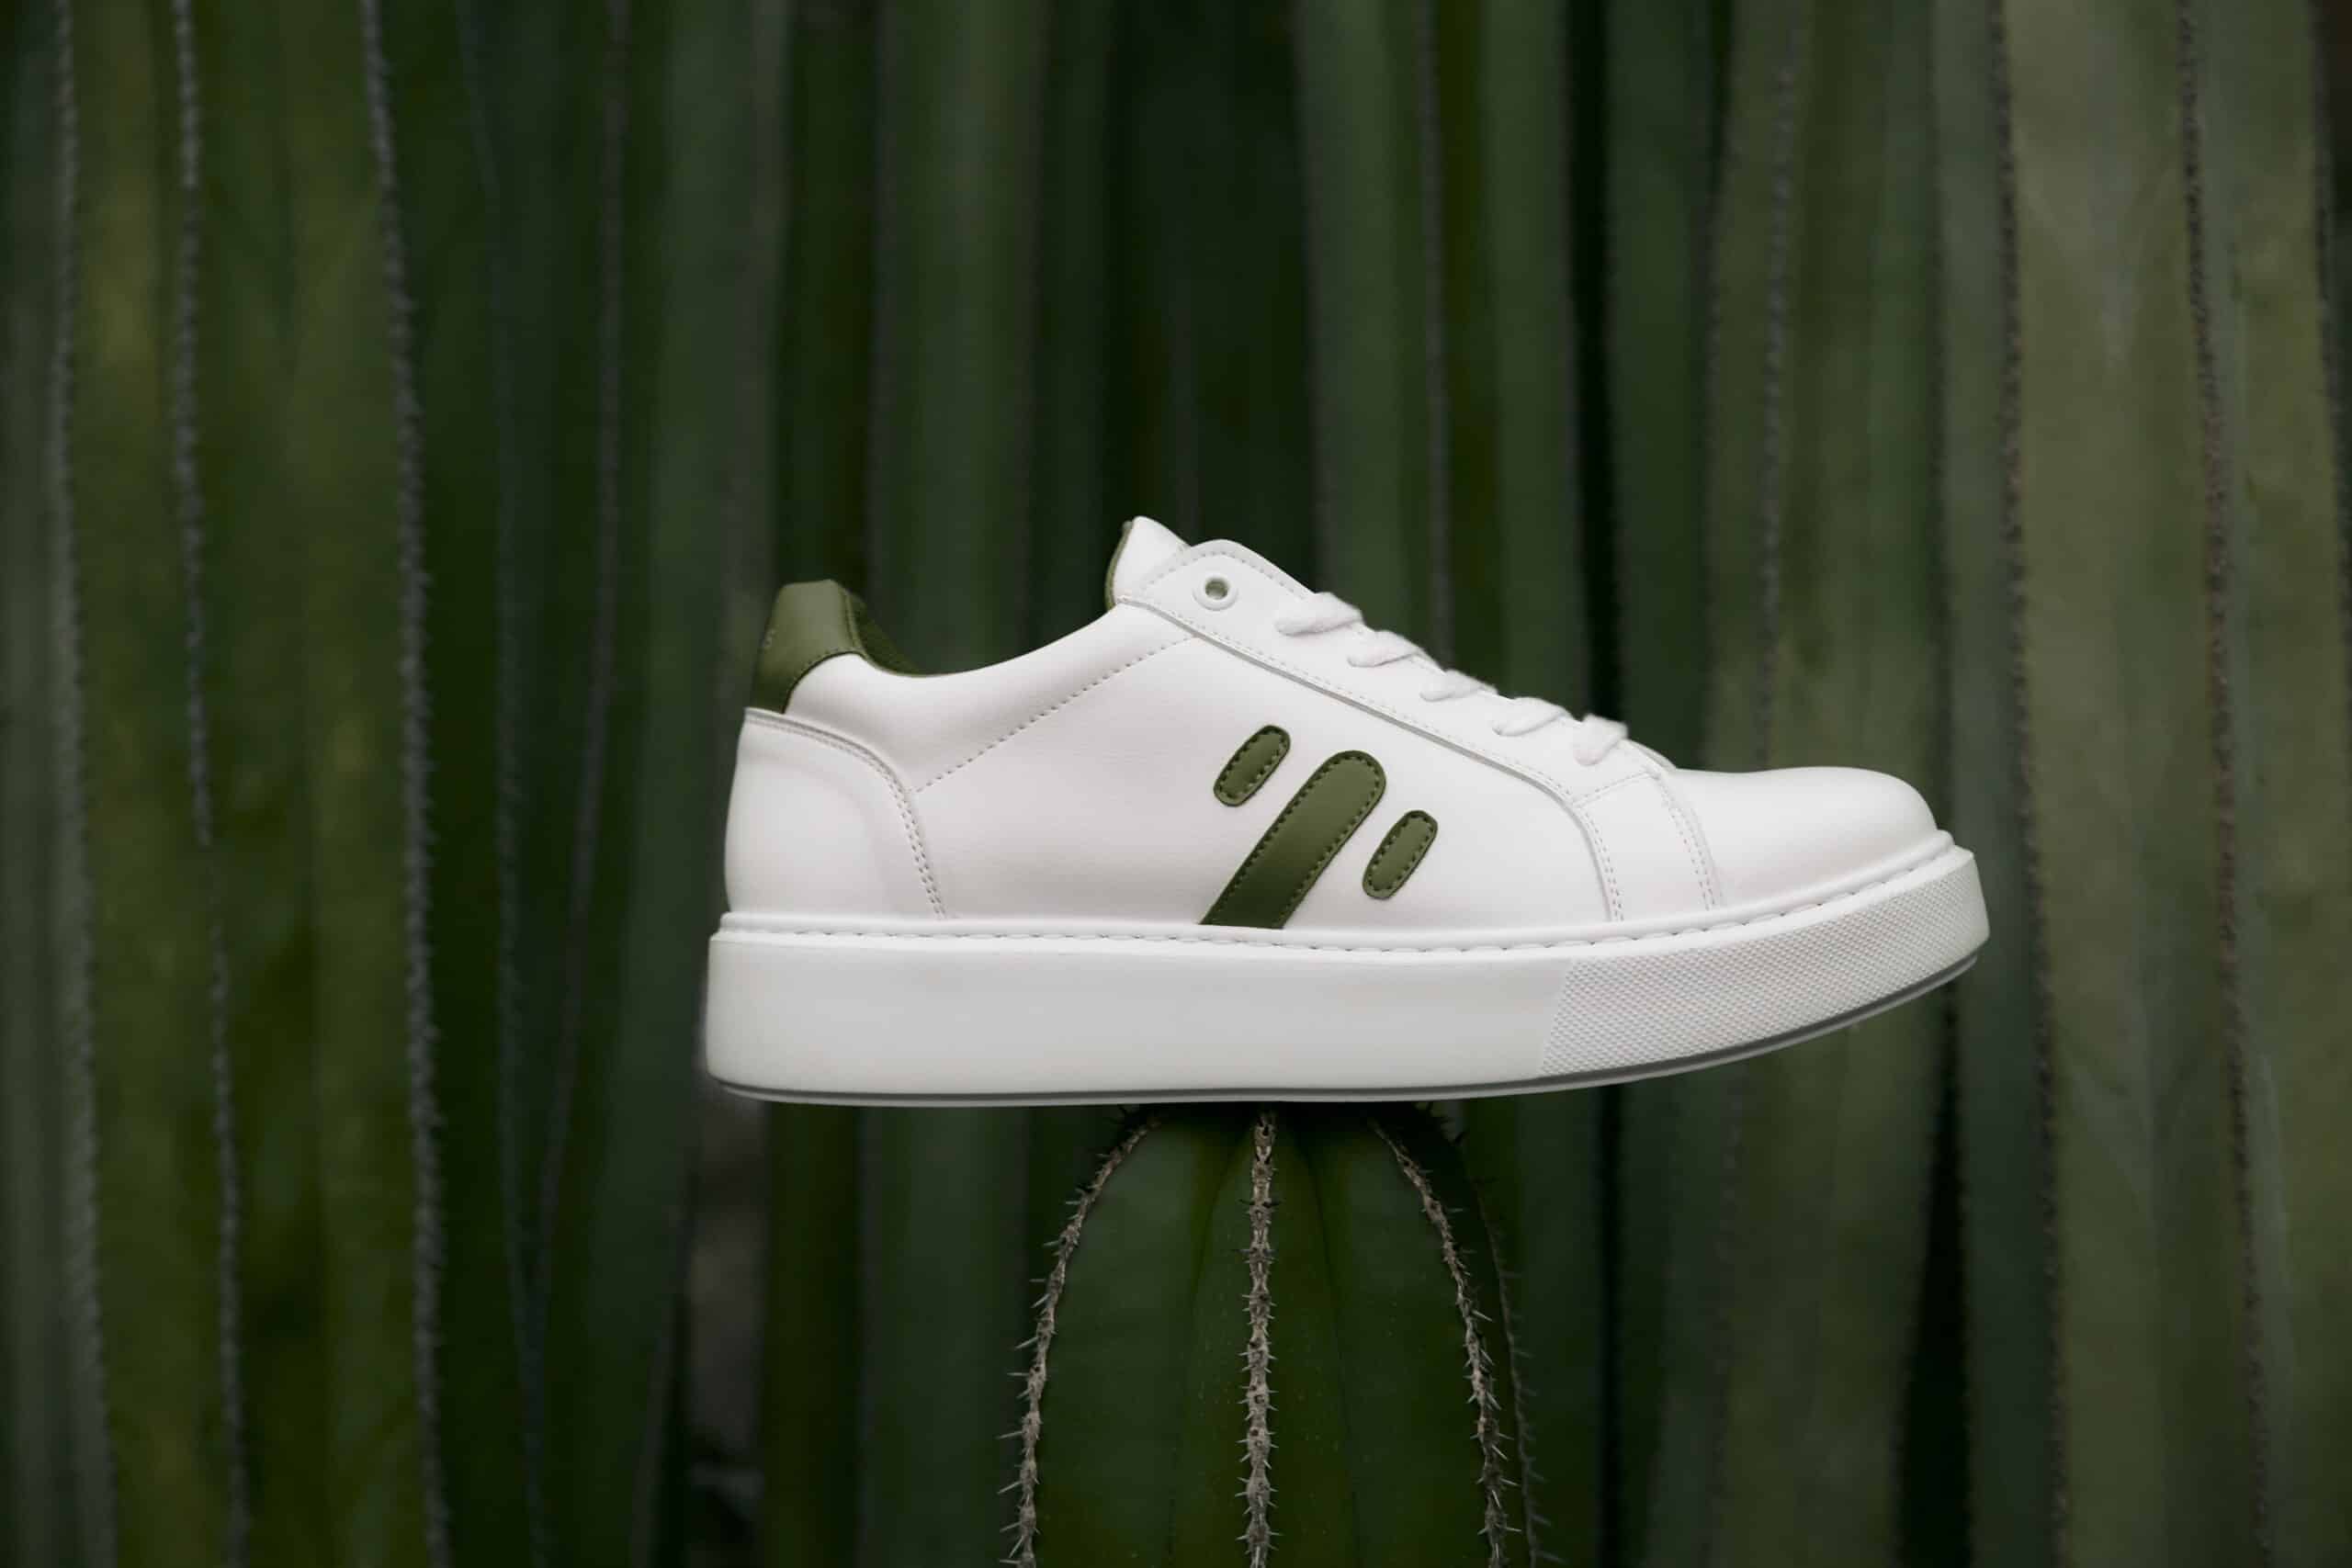 The 15 Best White Vegan Sneakers in 2019 | Shop the Trend - Vegan Style |  White sneakers women, Casual white sneakers, Vegan shoes women